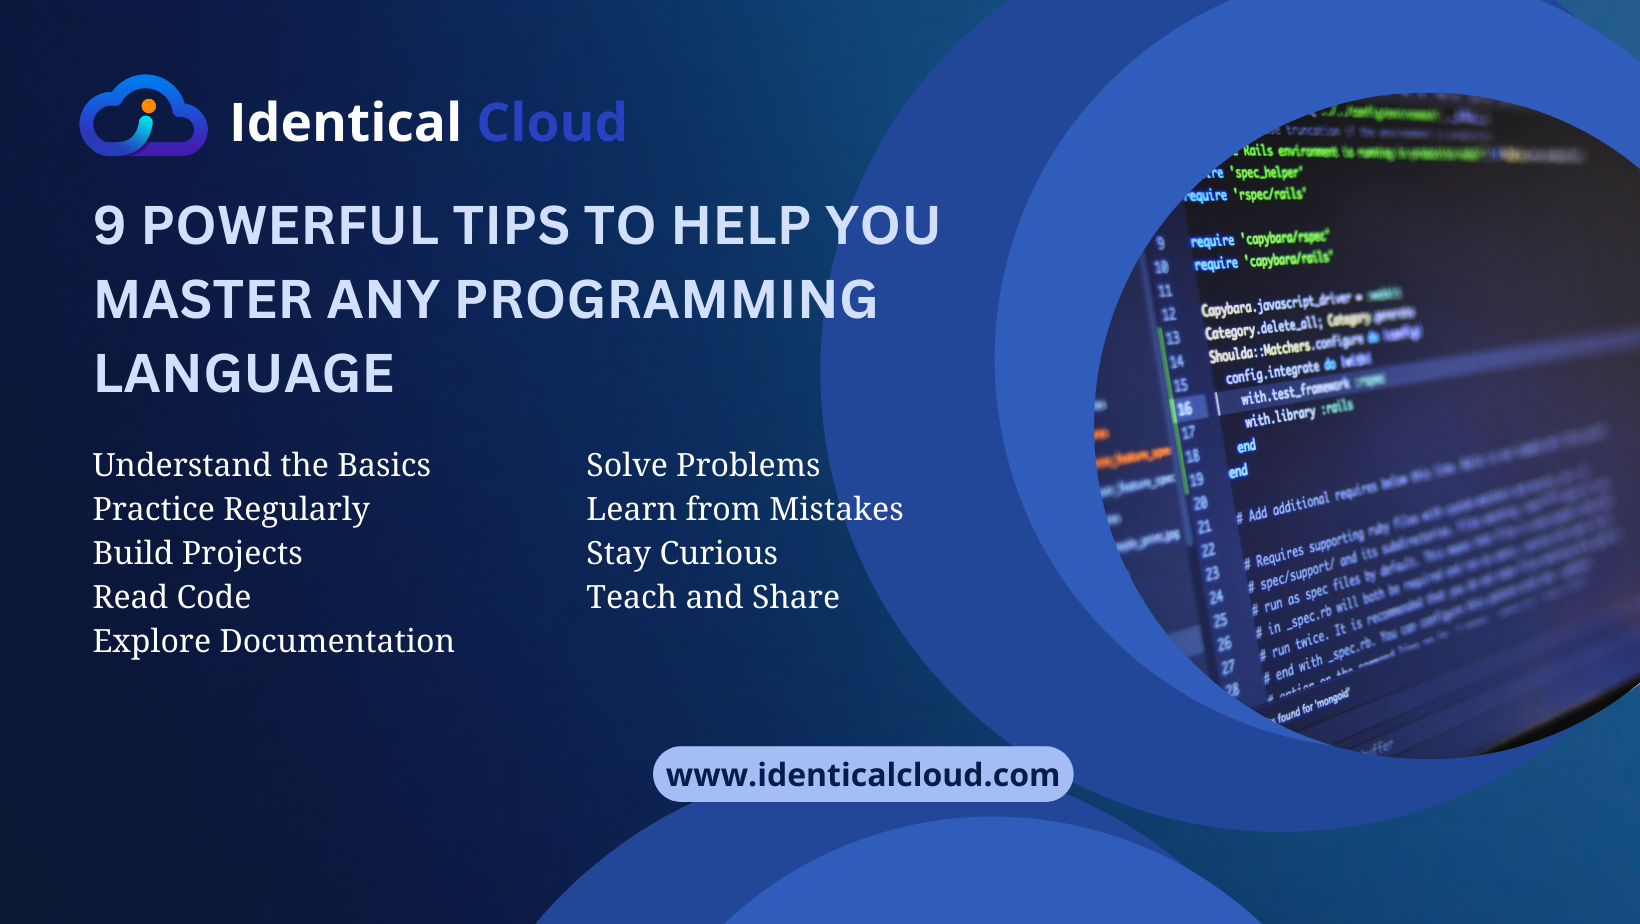 9 Powerful tips to Help You Master any programming Language - identicalcloud.com